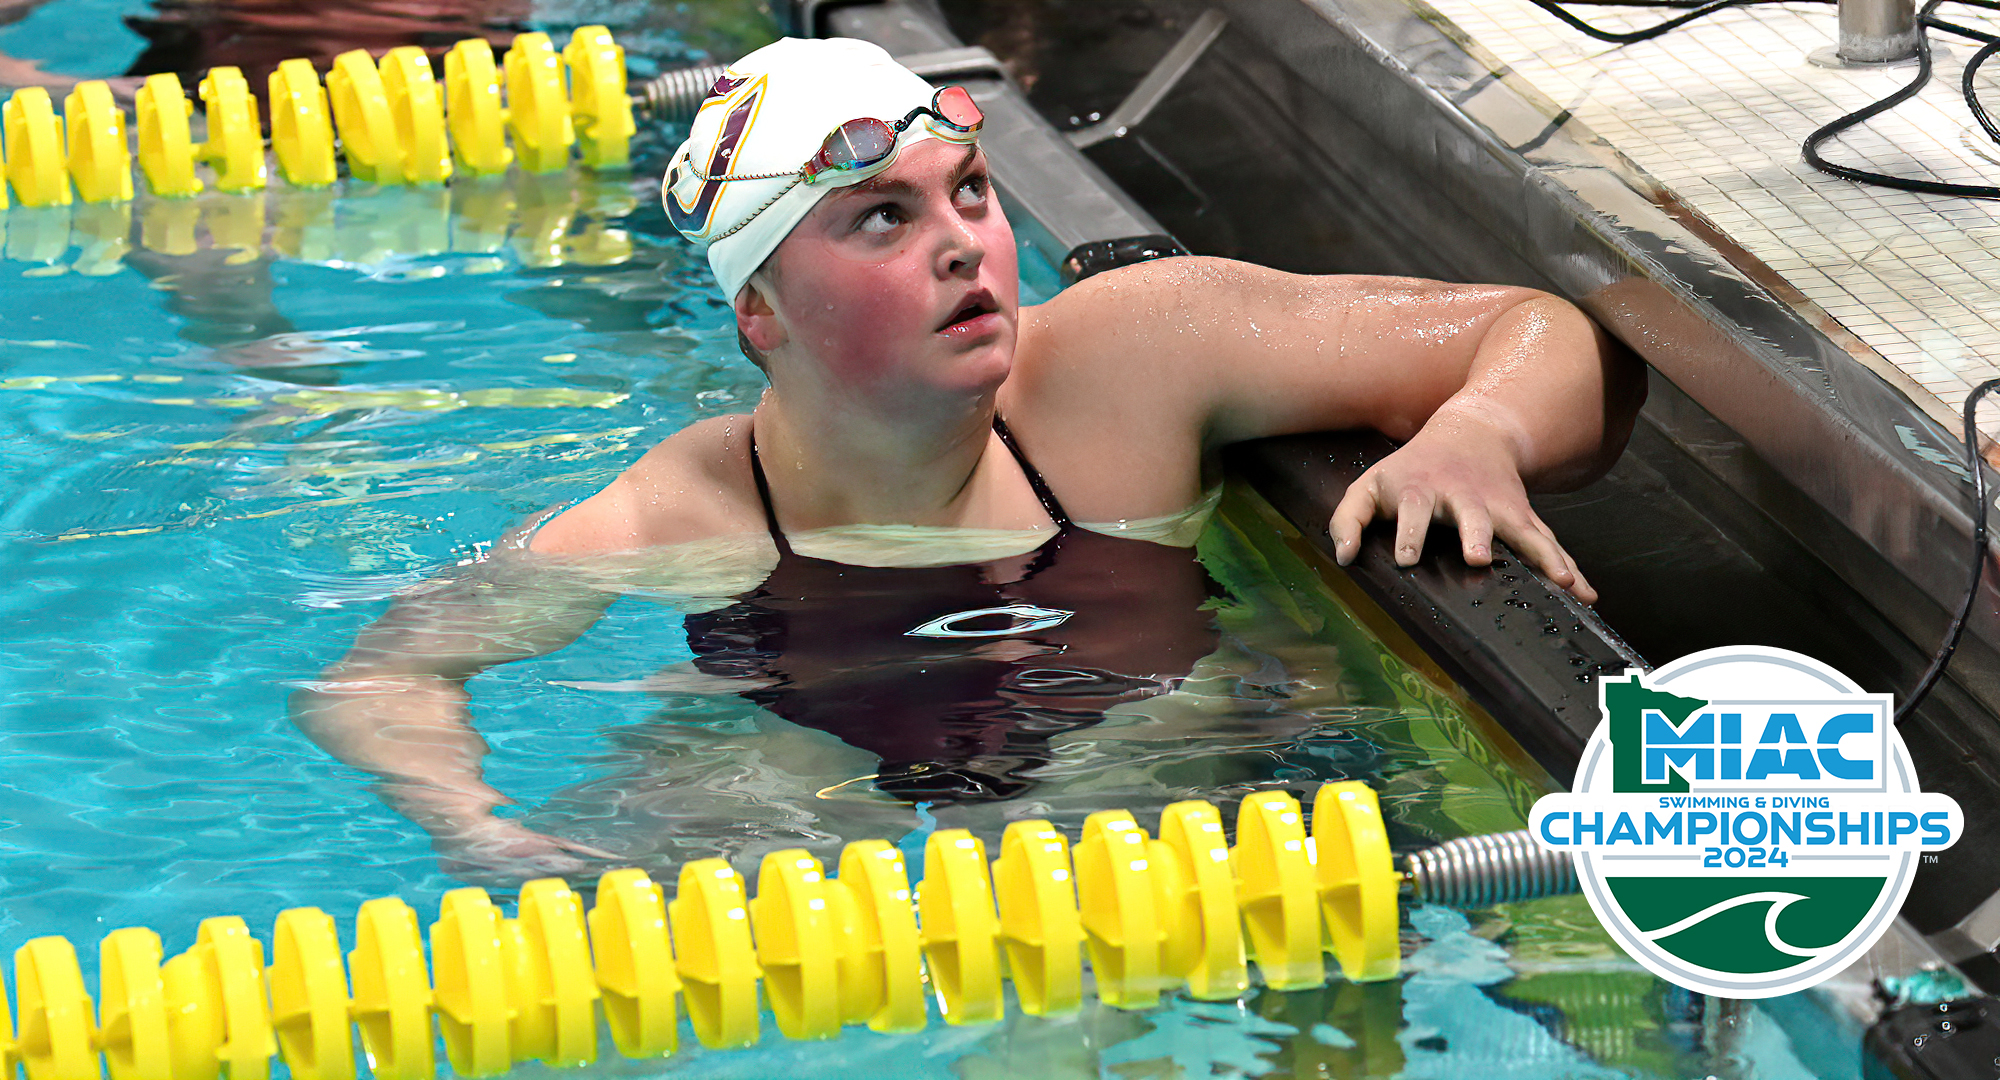 First-year swimmer Callie Metsala nearly qualified for the finals and broke a school record in the 200 IM on the first full day at the MIAC Meet.